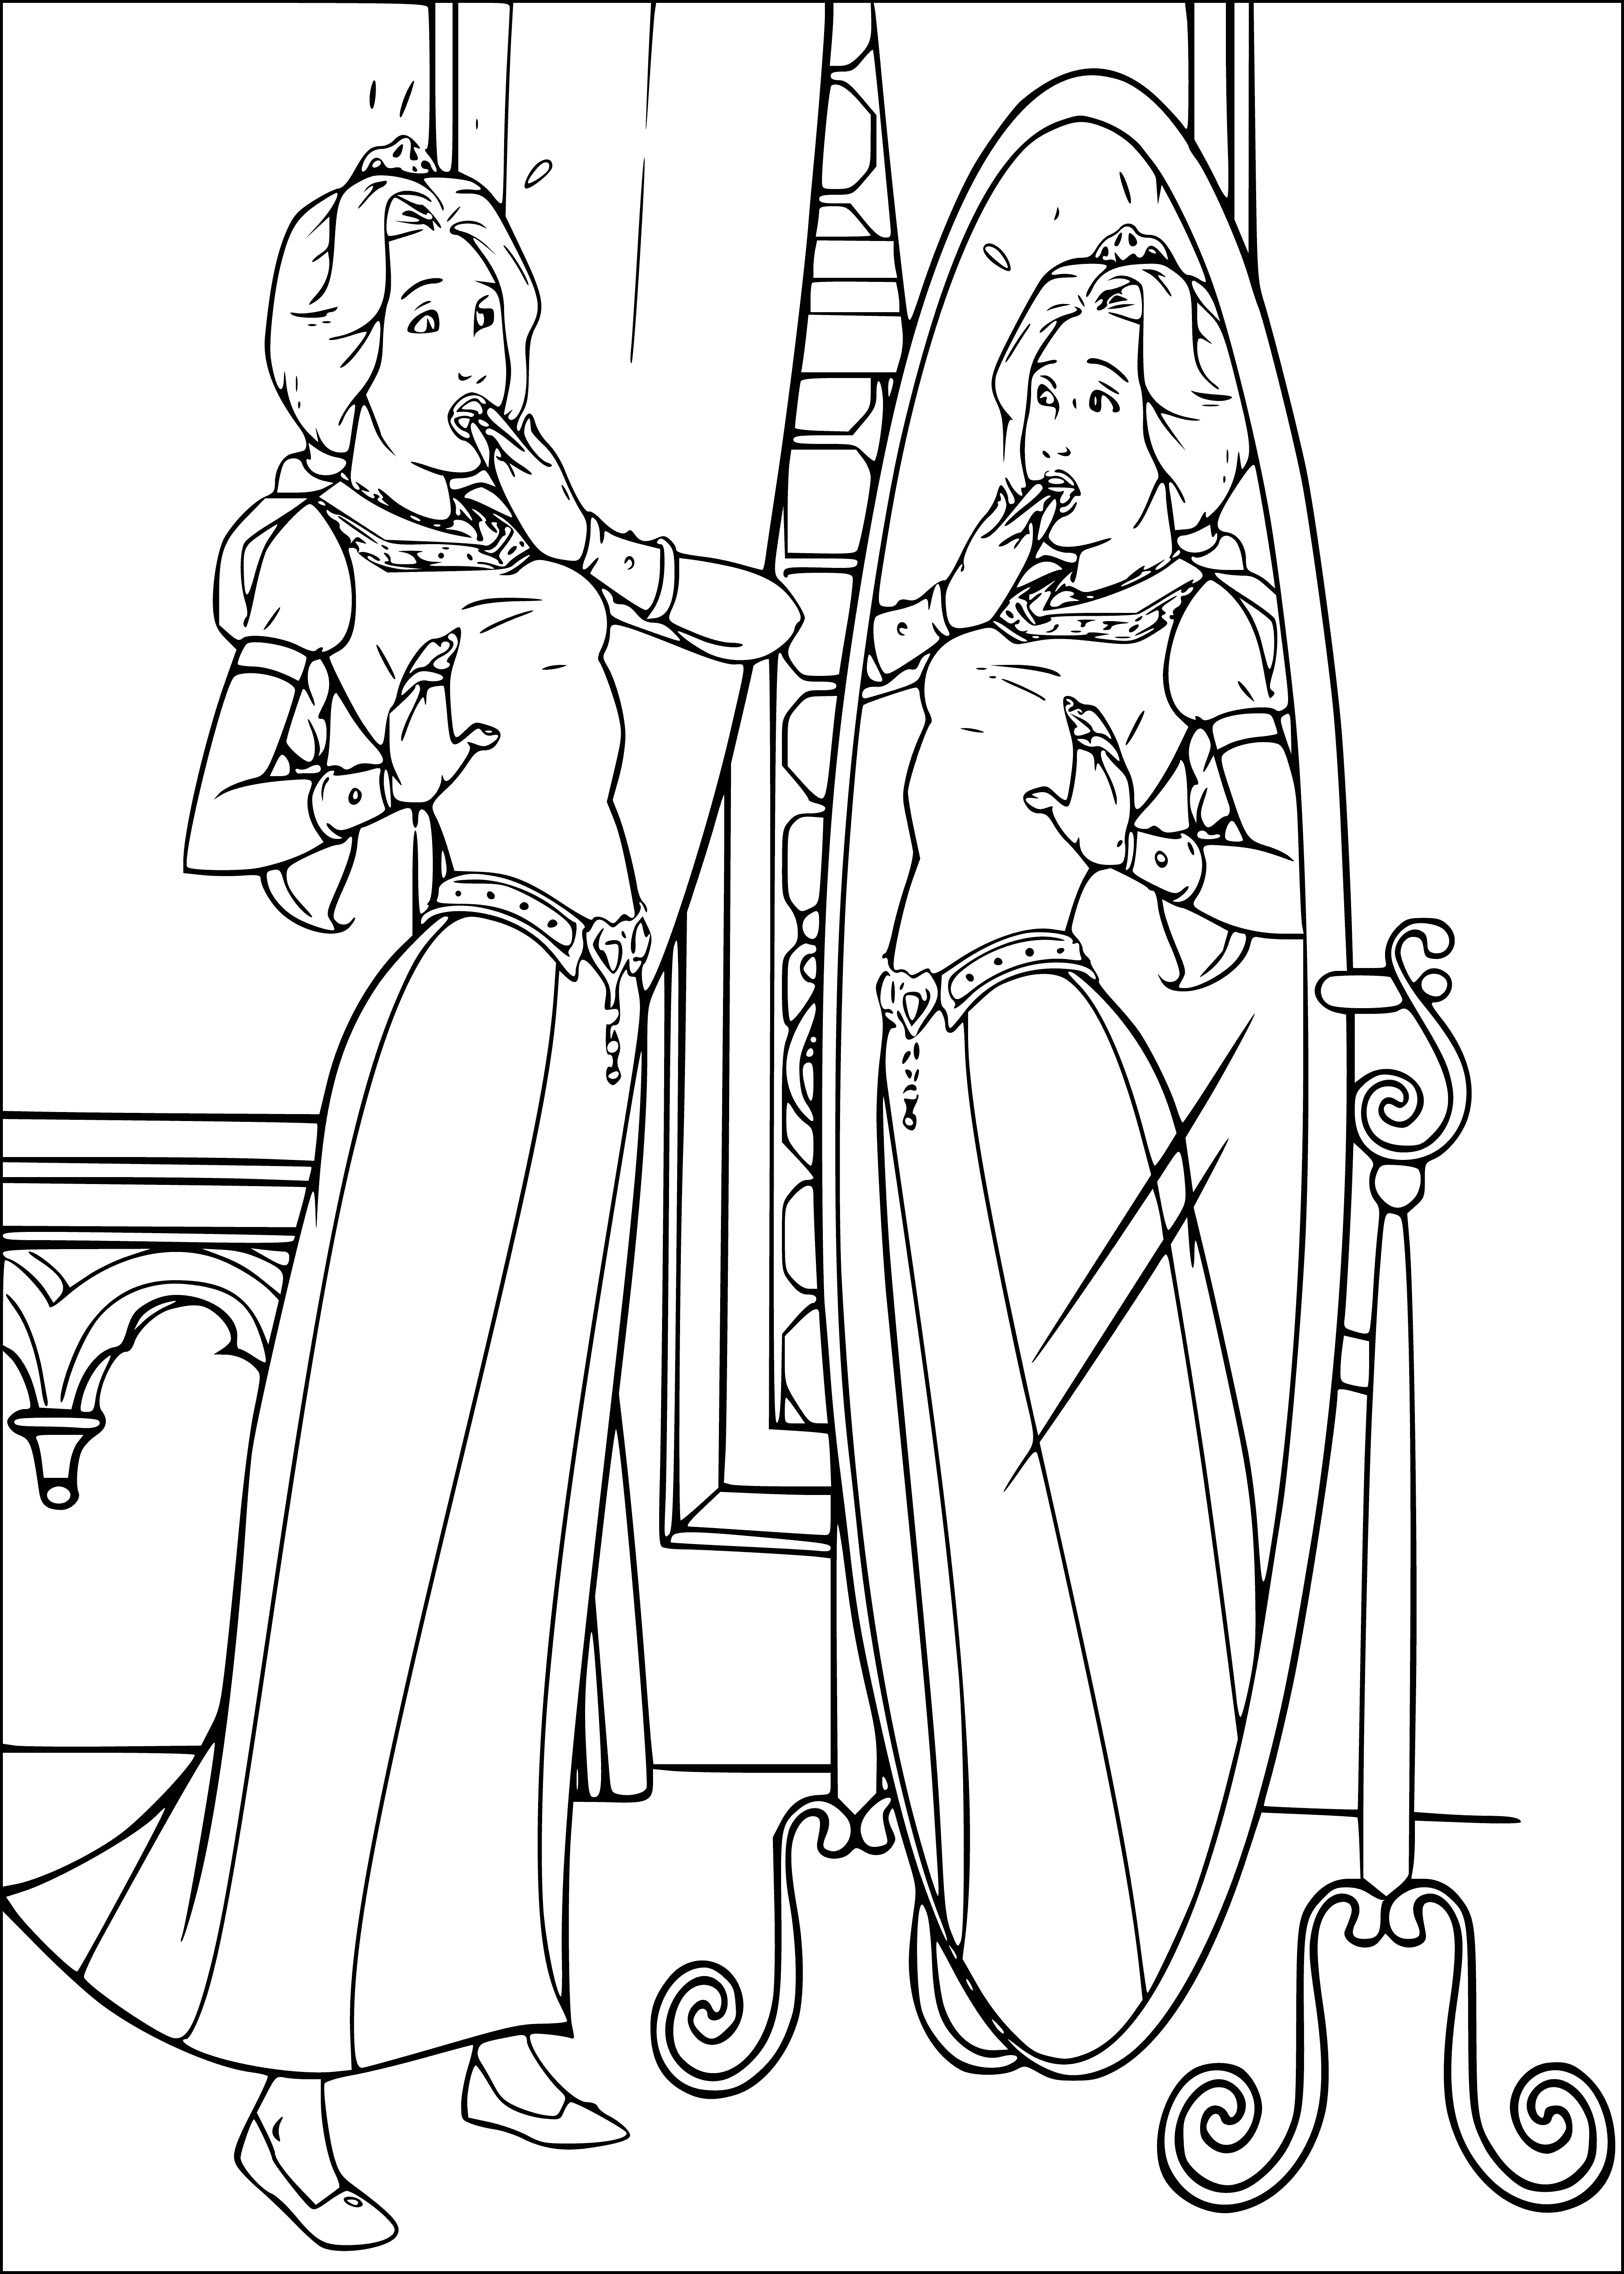 coloring page: Princess Fiona stands in front of a castle, hands on her hips, in a green dress, pink cape & blue crown. #Shrek